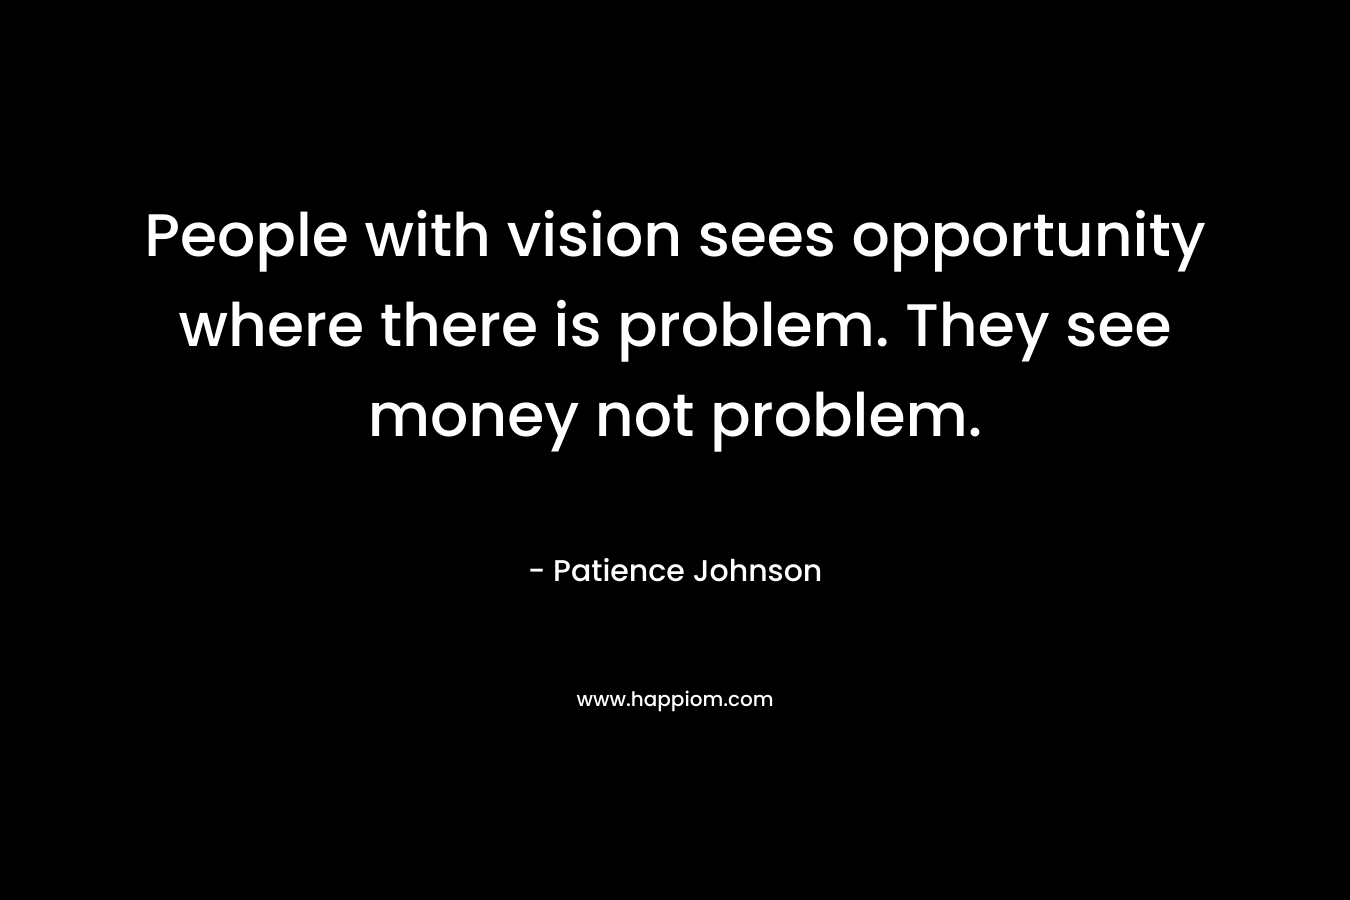 People with vision sees opportunity where there is problem. They see money not problem.